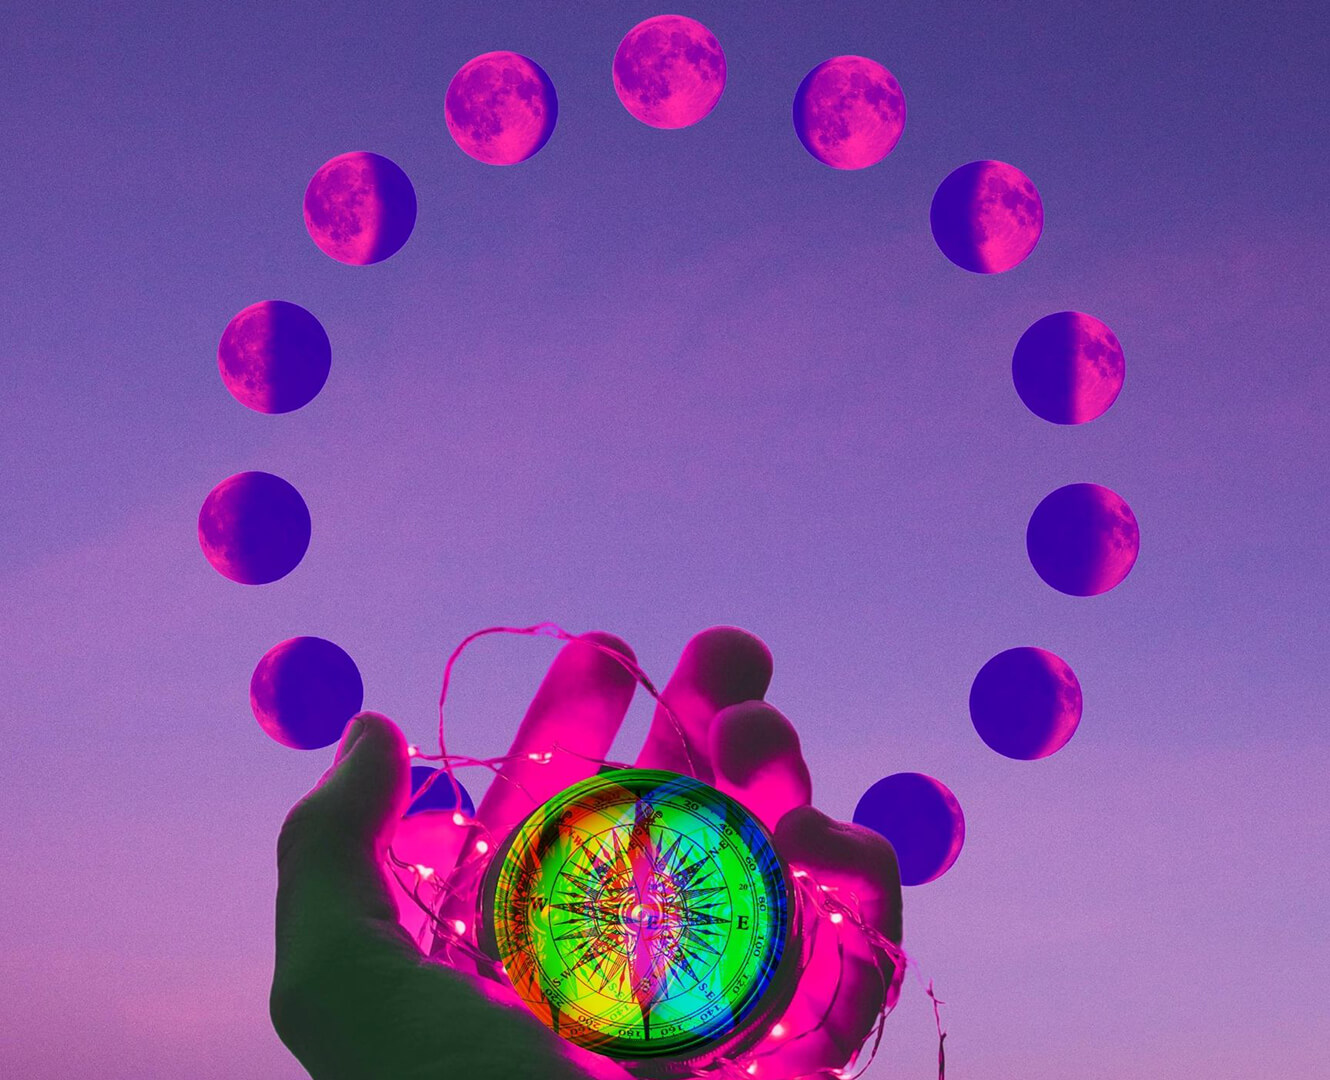 person holding compass in front of 12 moons sphere during dawn